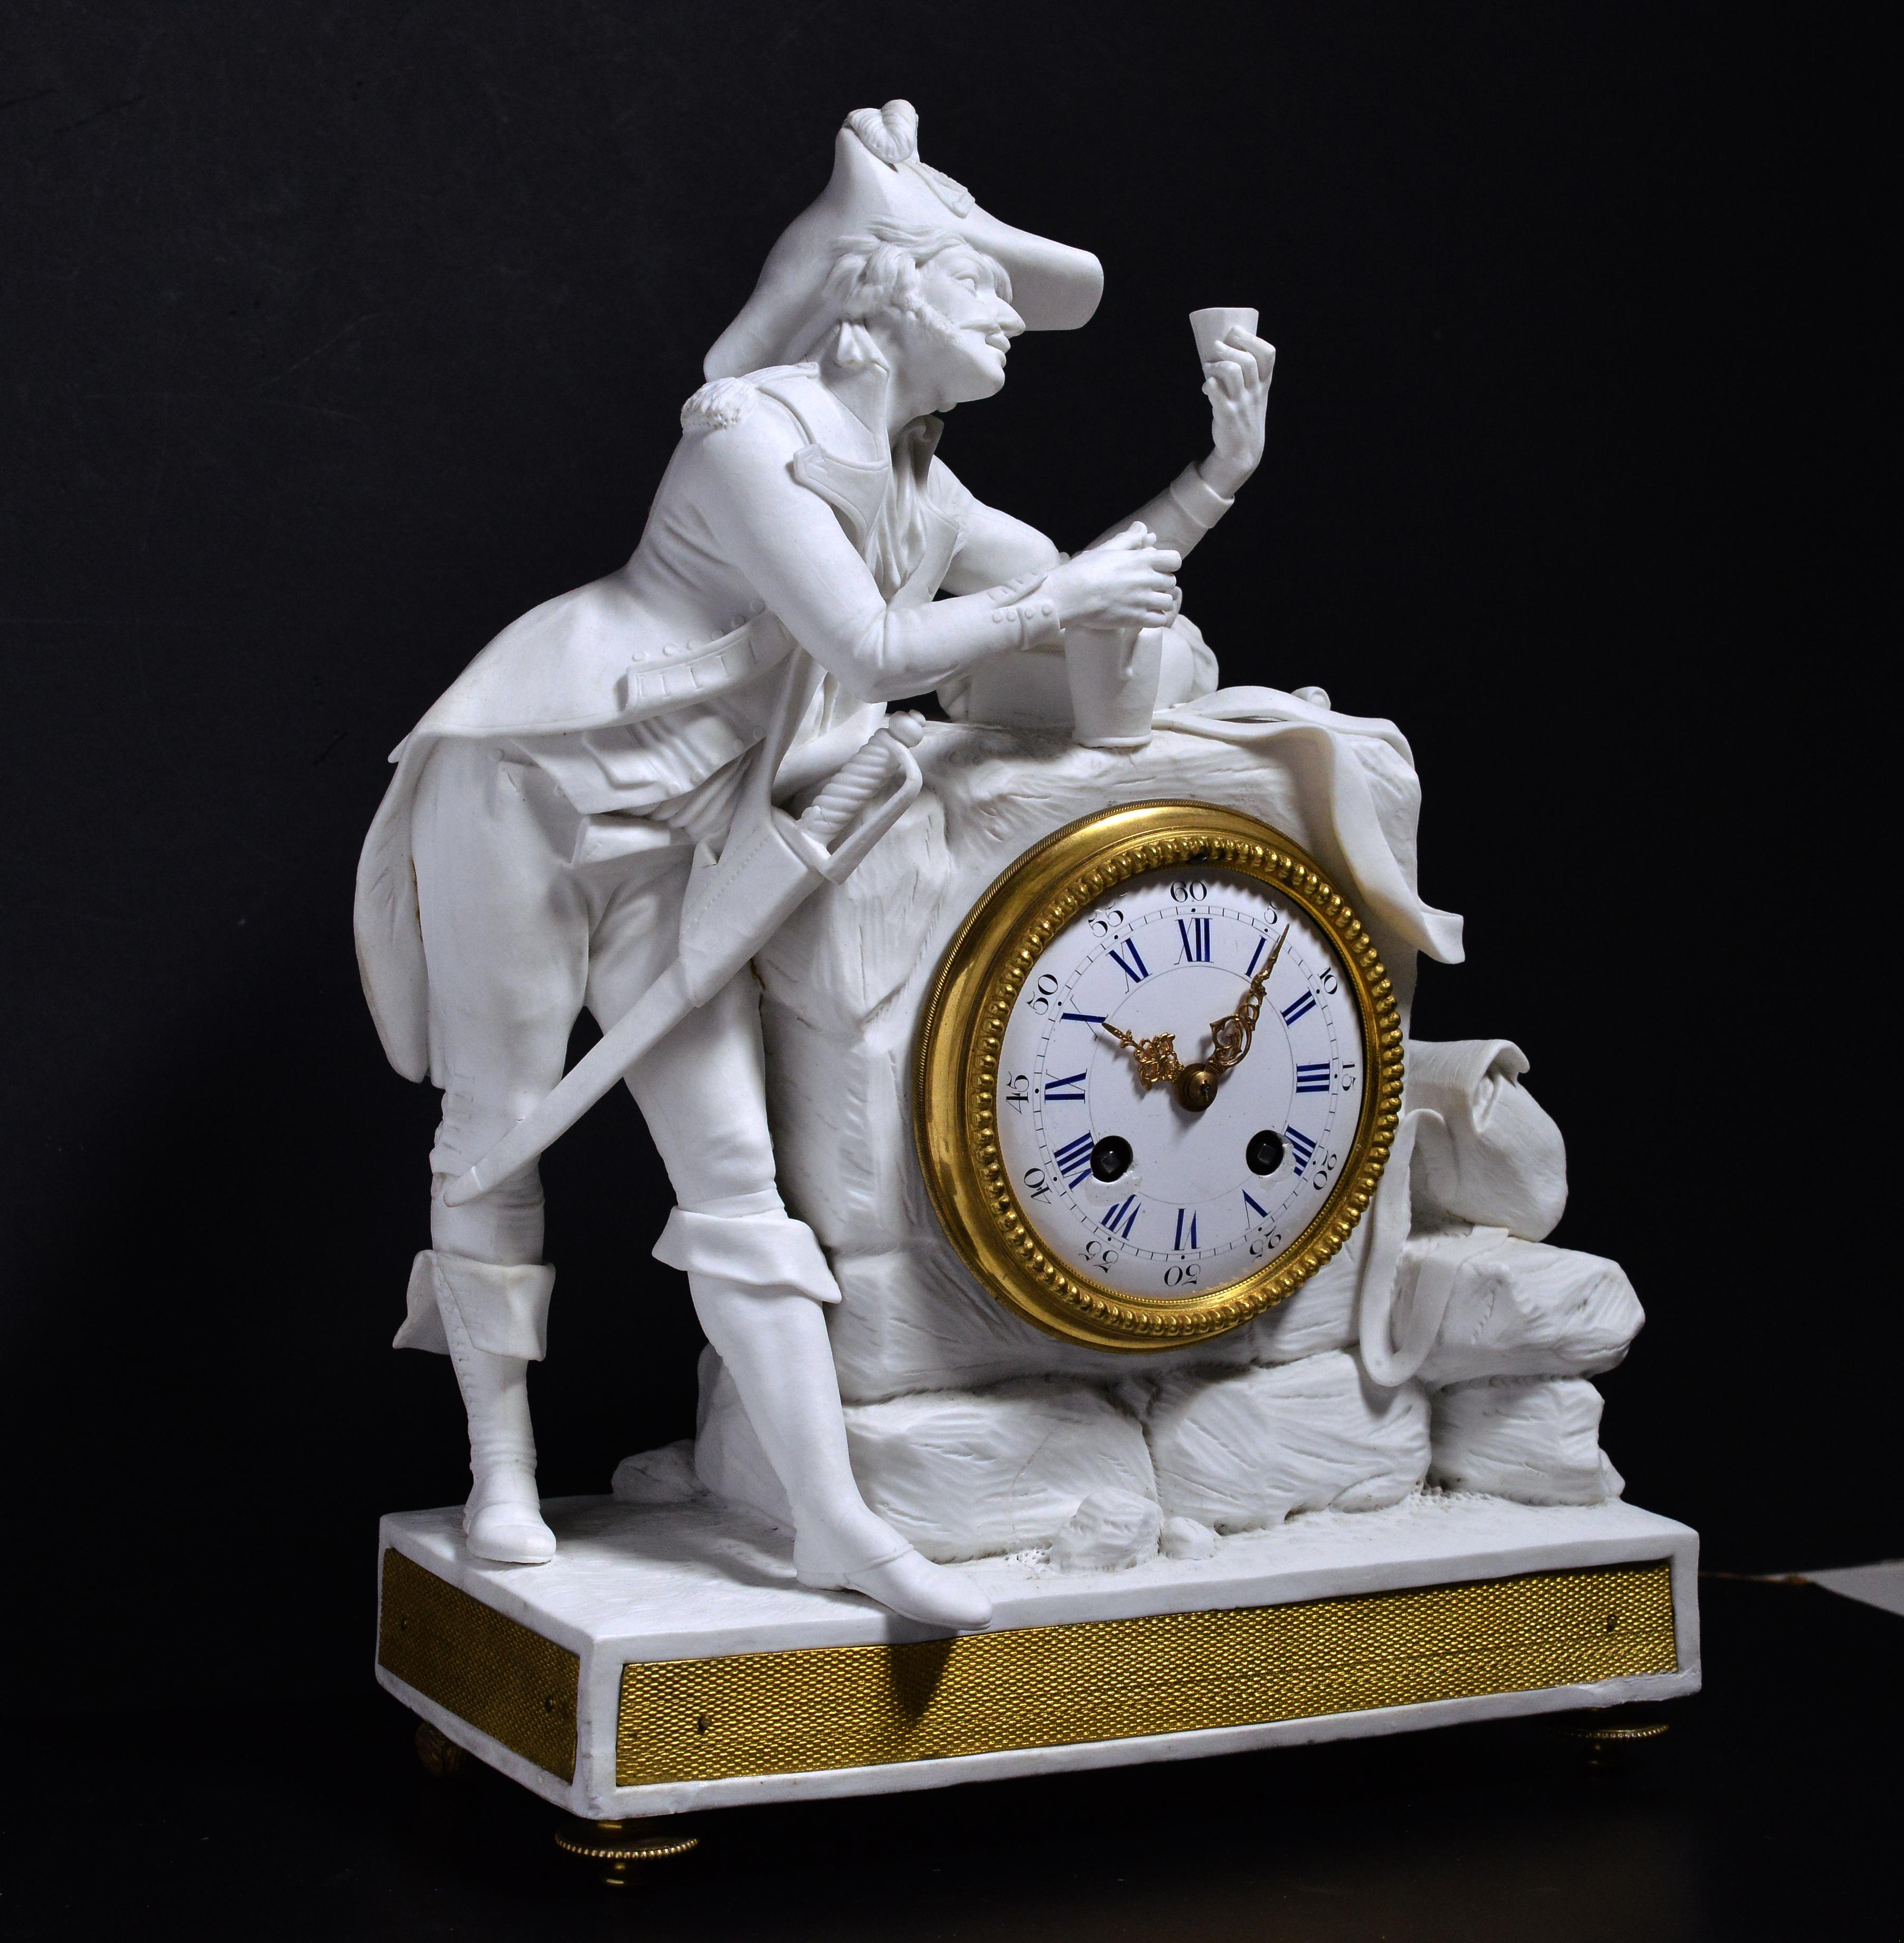 Made of bisque porcelain in the middle of 19th century, presumably by Royal French Porcelain Manufacture de Sevres, the clock in the form of a scene where an elegant officer was depicted at intermedia of military routine, going to merrily celebrate